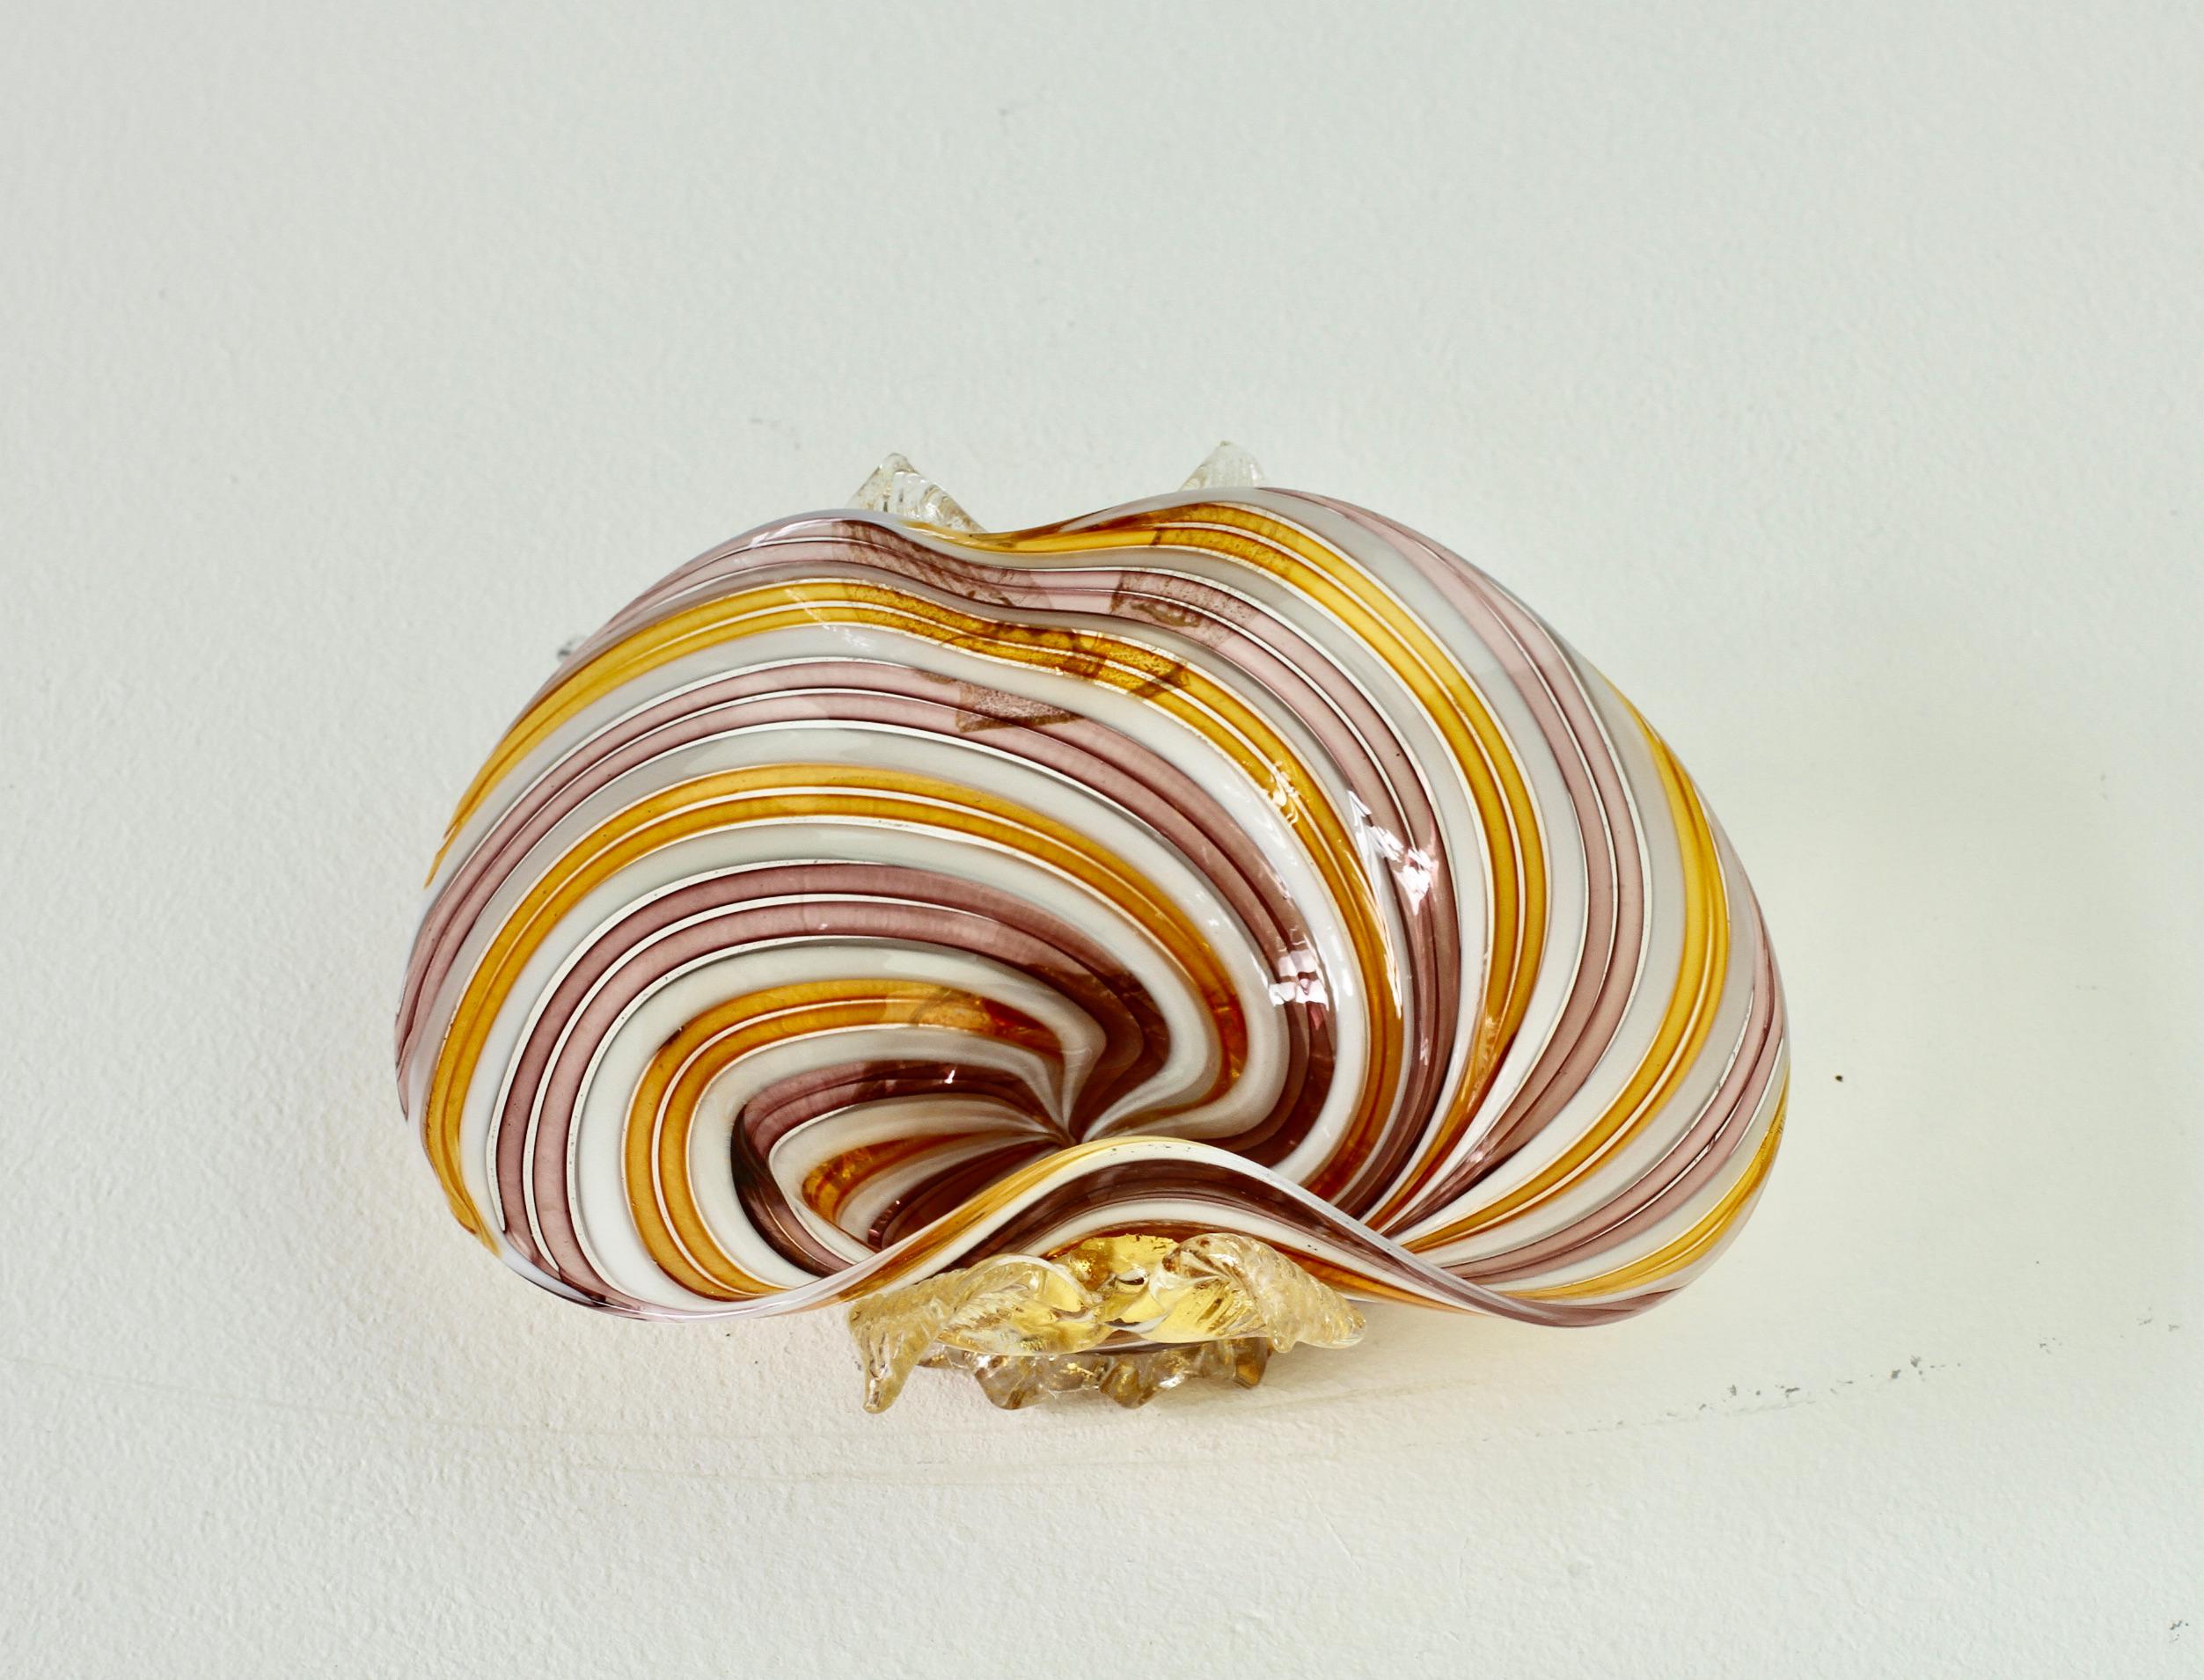 This is a magical piece of Murano glass - displaying some exquisite Italian glass techniques. Captured in stunning colours of pink/lilac, yellow, white and clear 'fliligrana' glass (glass canes placed together flat on a plate before being melted to